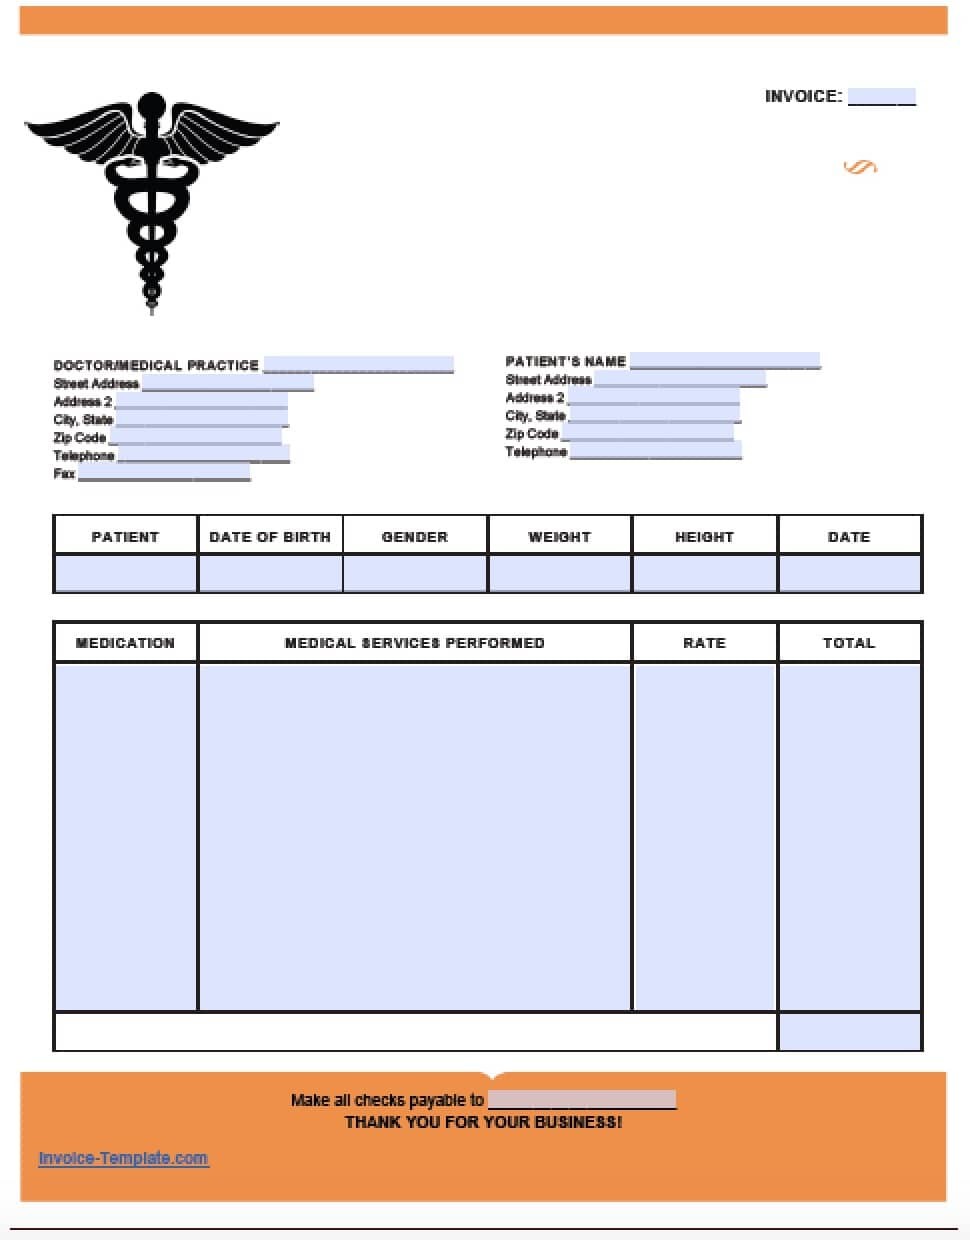 Free Medical Invoice Template Excel PDF Word Doc Document Insurance